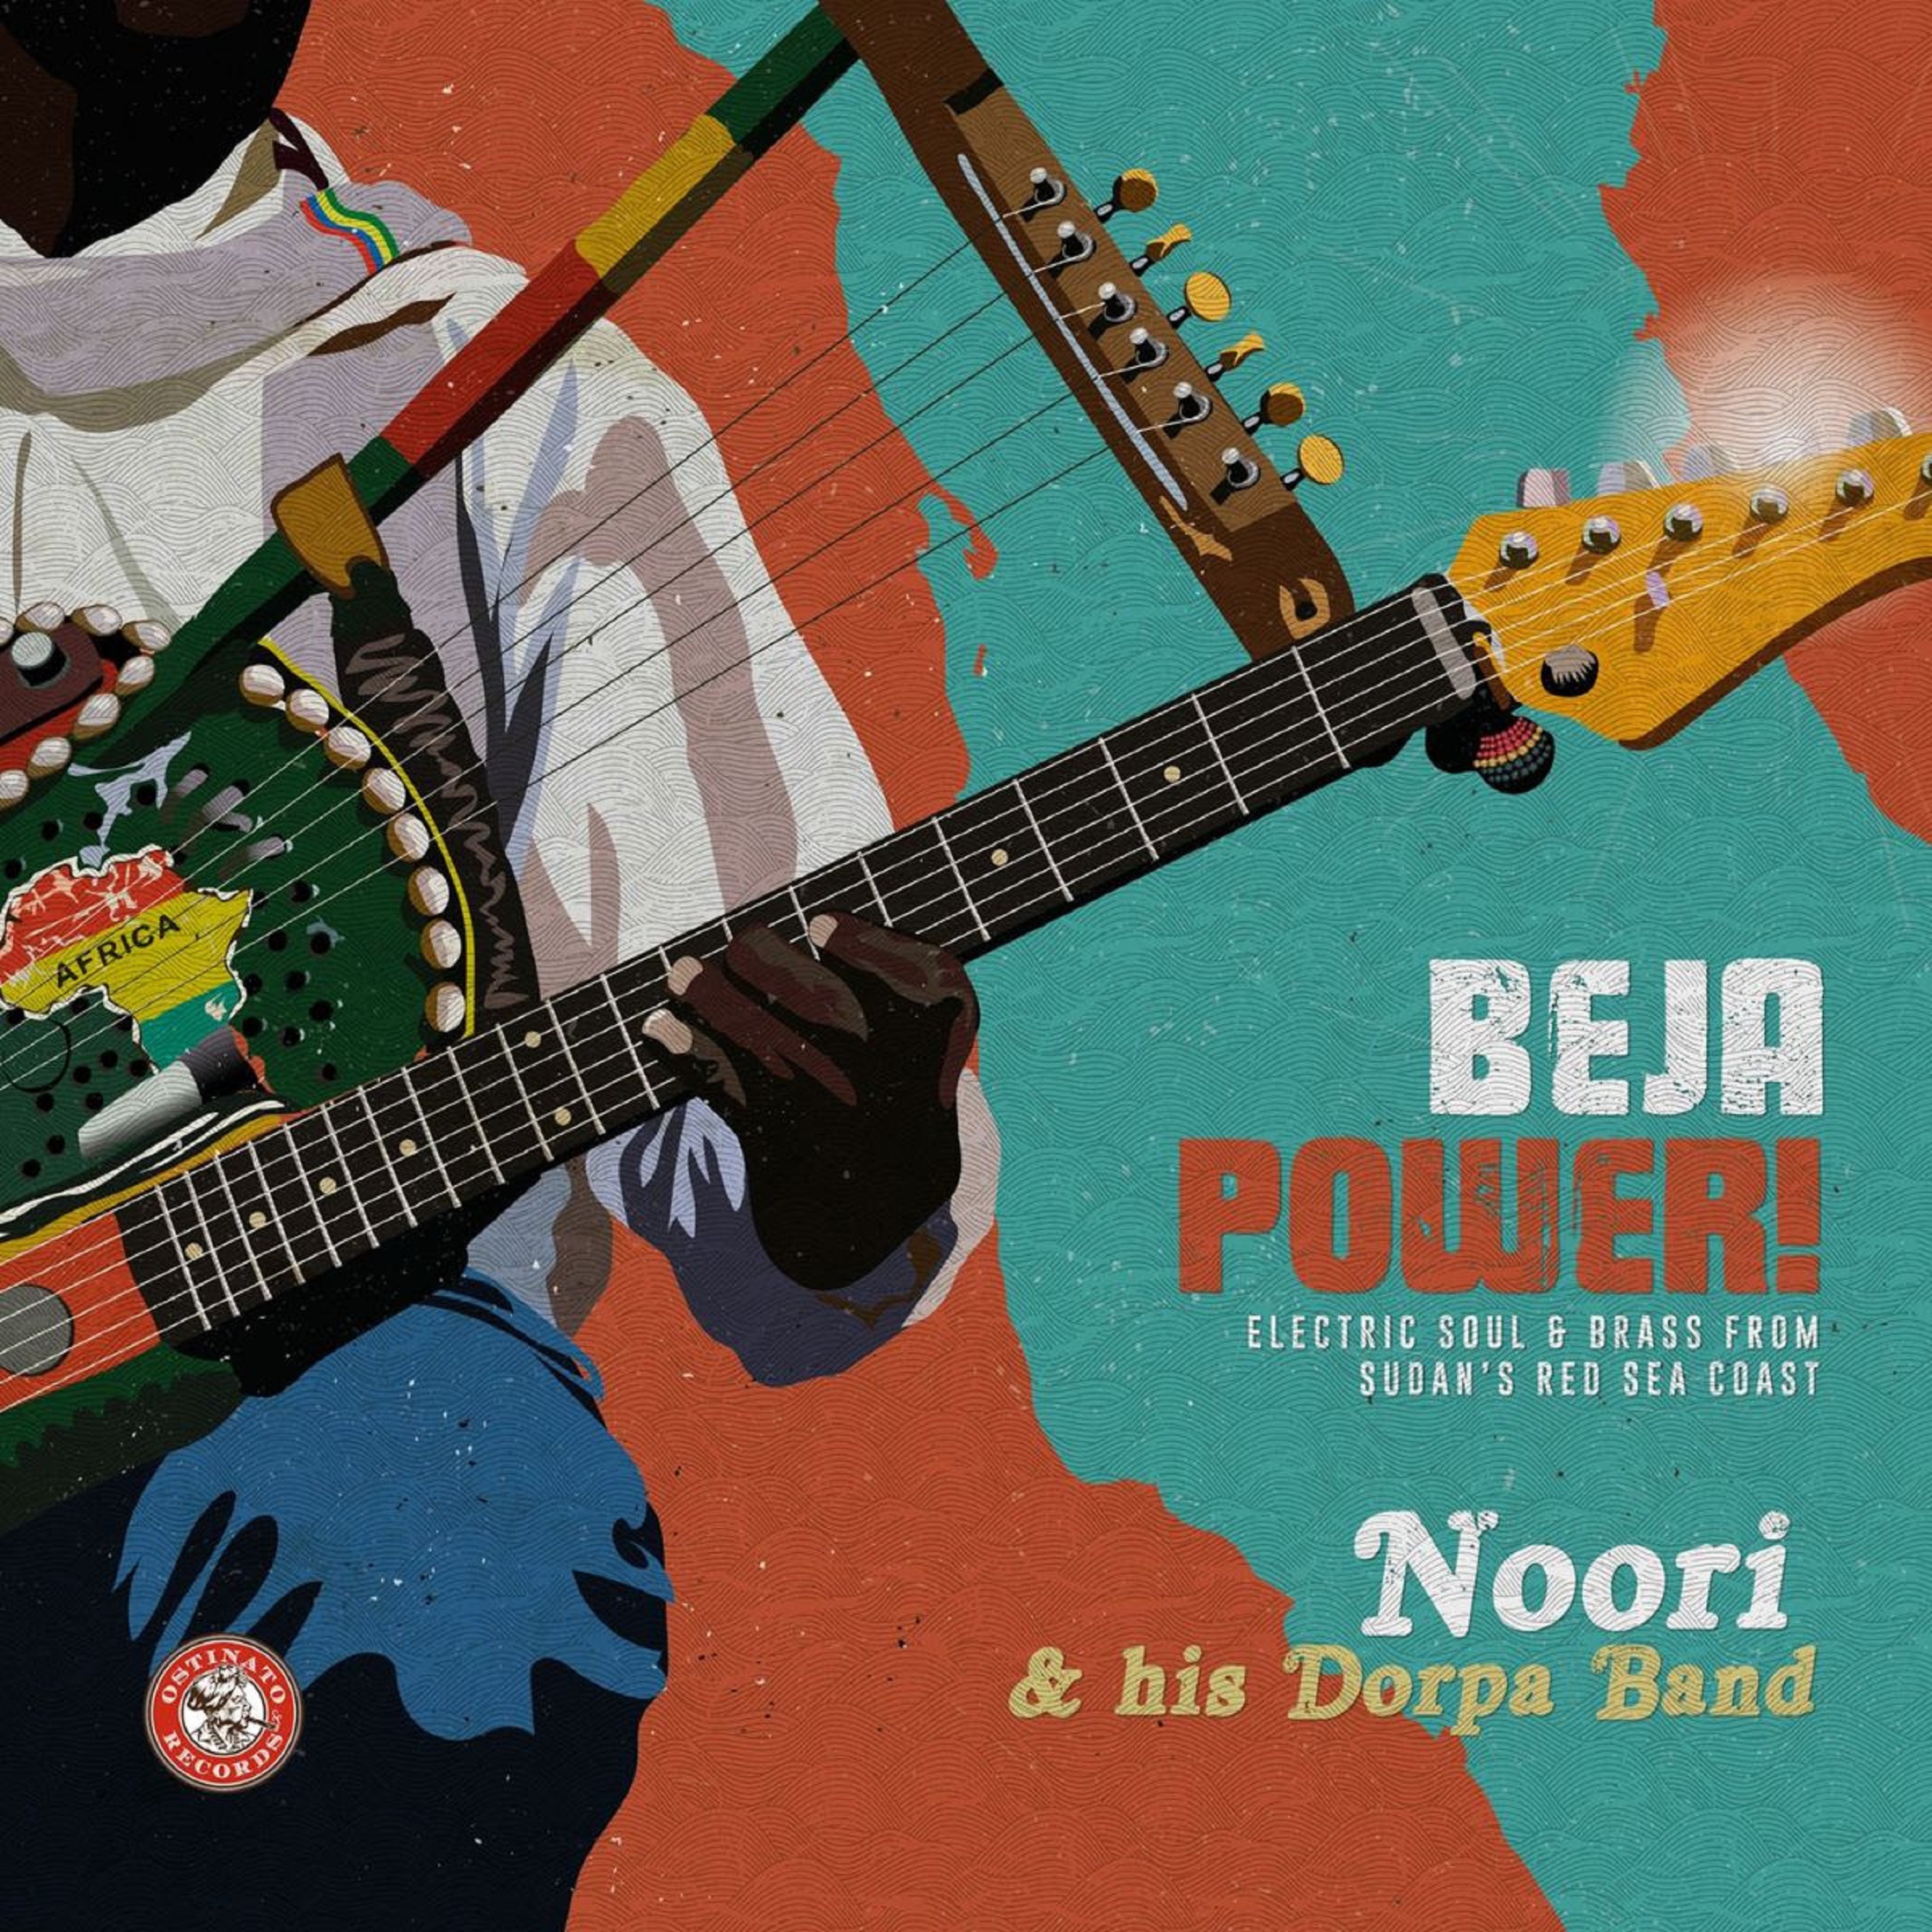 BEJA POWER! Electric Soul & Brass from Sudan’s Red Sea Coast